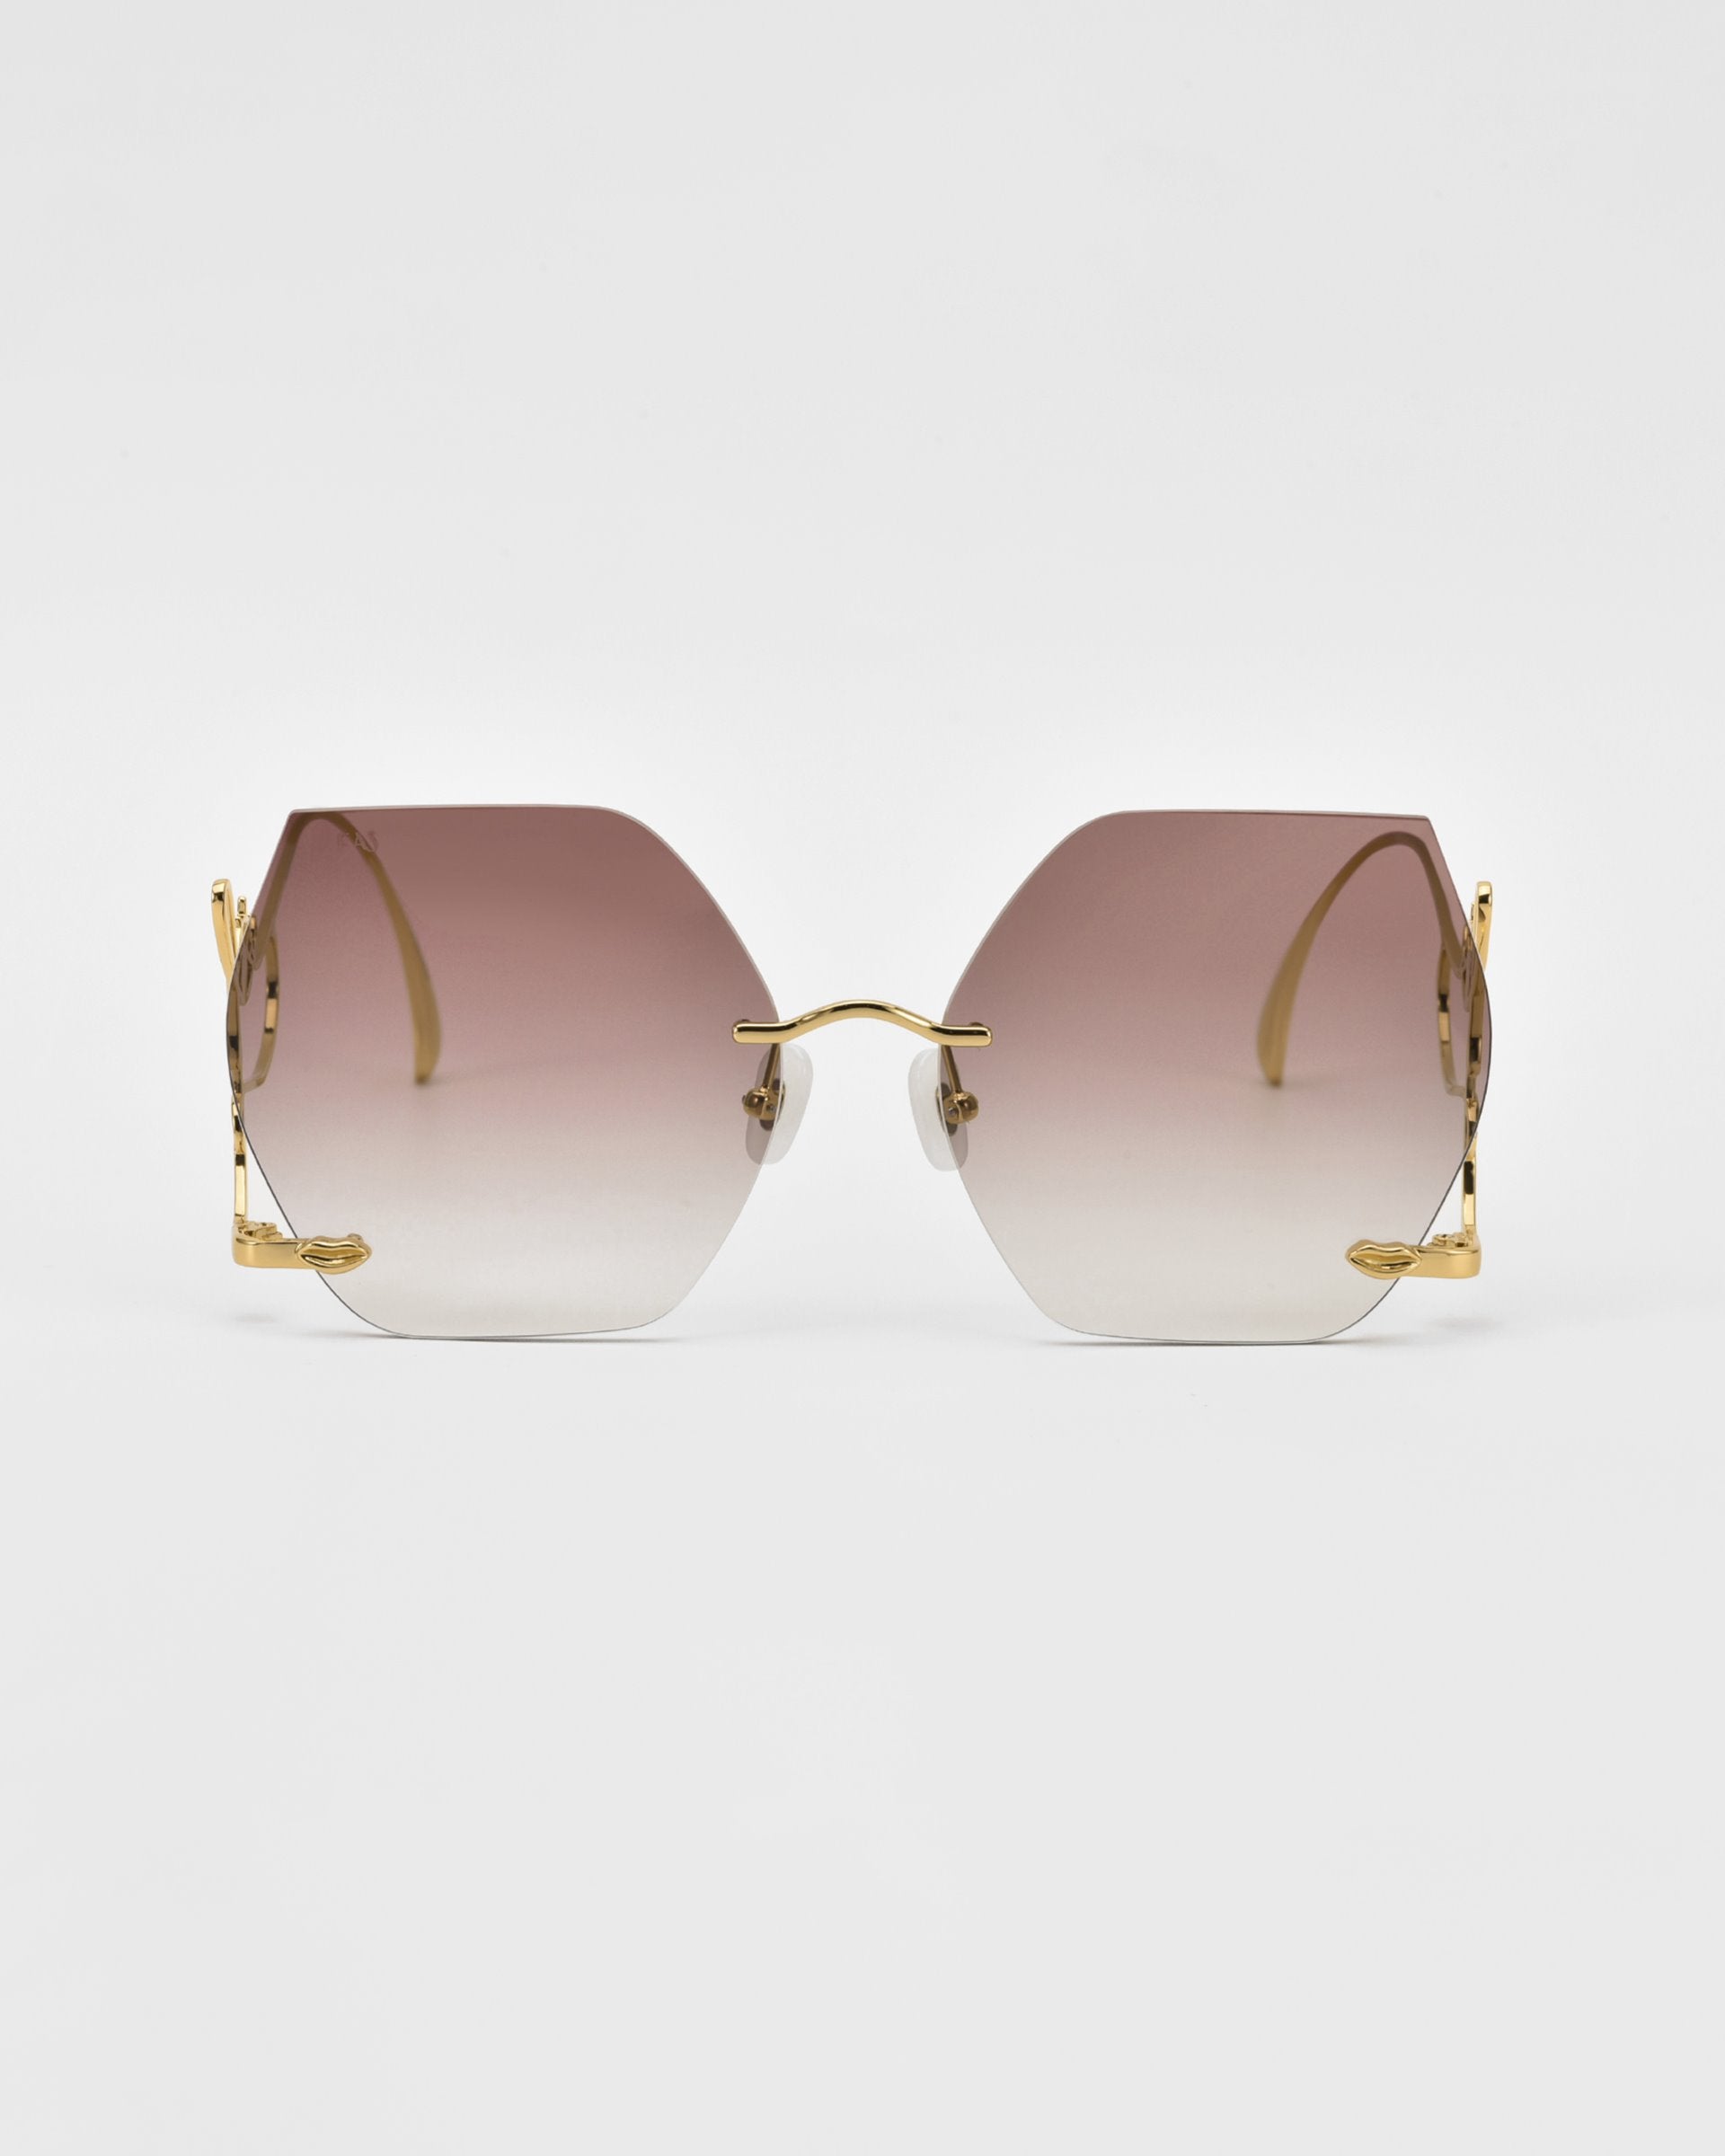 A pair of limited edition Cry Me a River hexagonal sunglasses with gradient lenses transitioning from dark brown at the top to clear at the bottom. The sunglasses feature gold-toned metal temples and a minimalist frame design, set against a plain white background. The brand is For Art's Sake®.